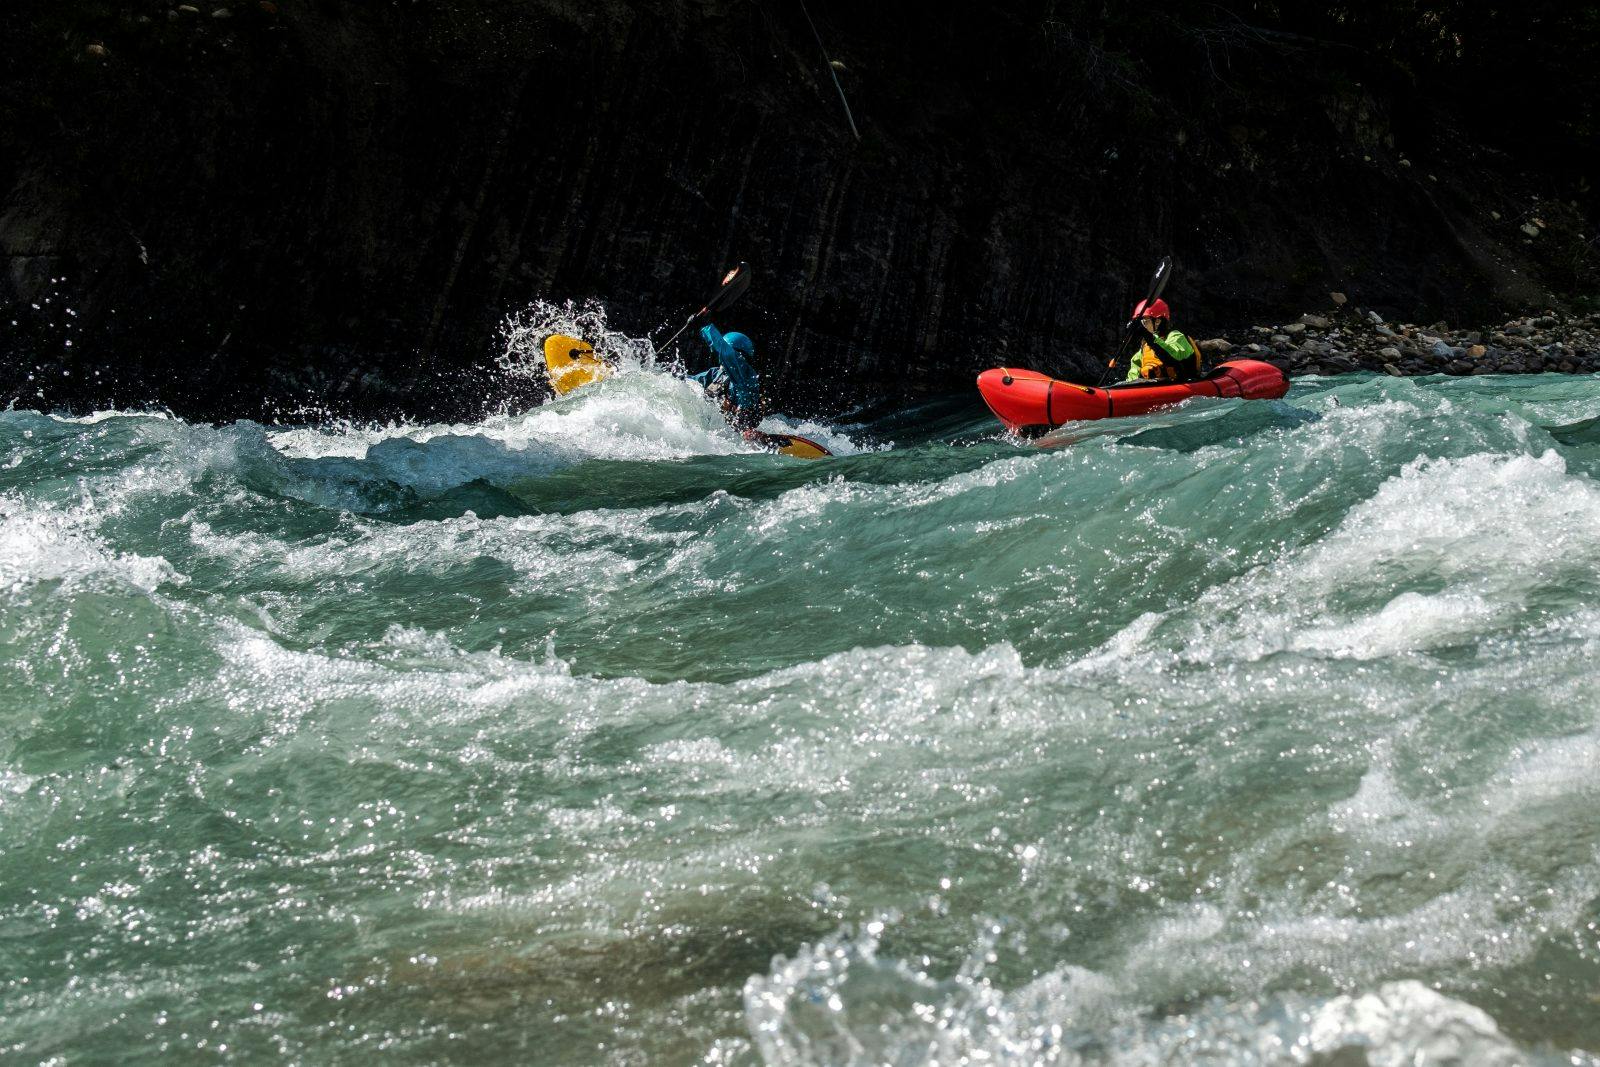 Rachel Davies and Laura Robinson smashing wave trains on the Snake Indian River. Photo by Coburn Brown